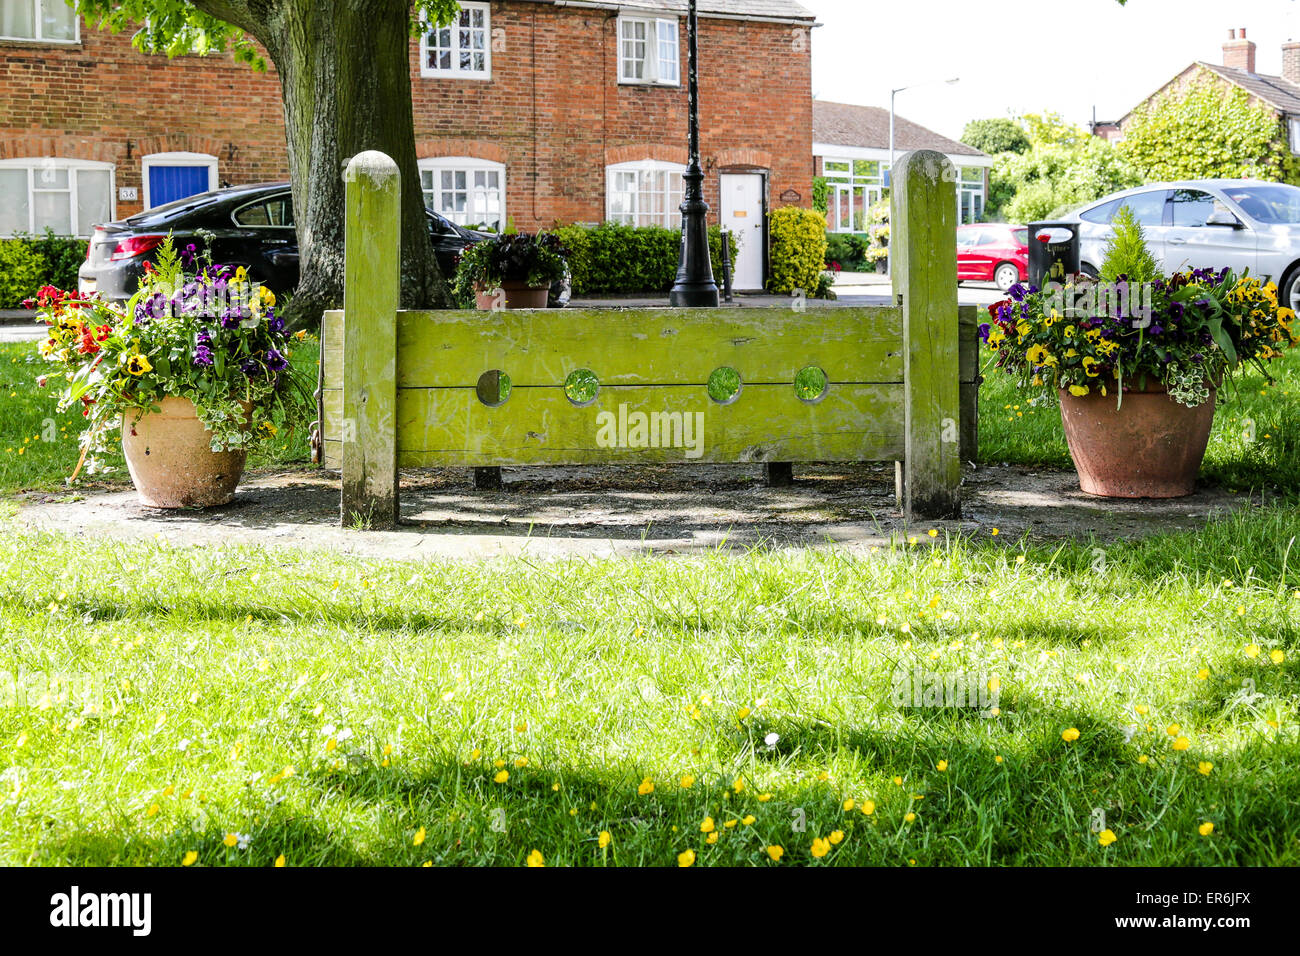 The stocks on the village green in an English rural community Stock Photo